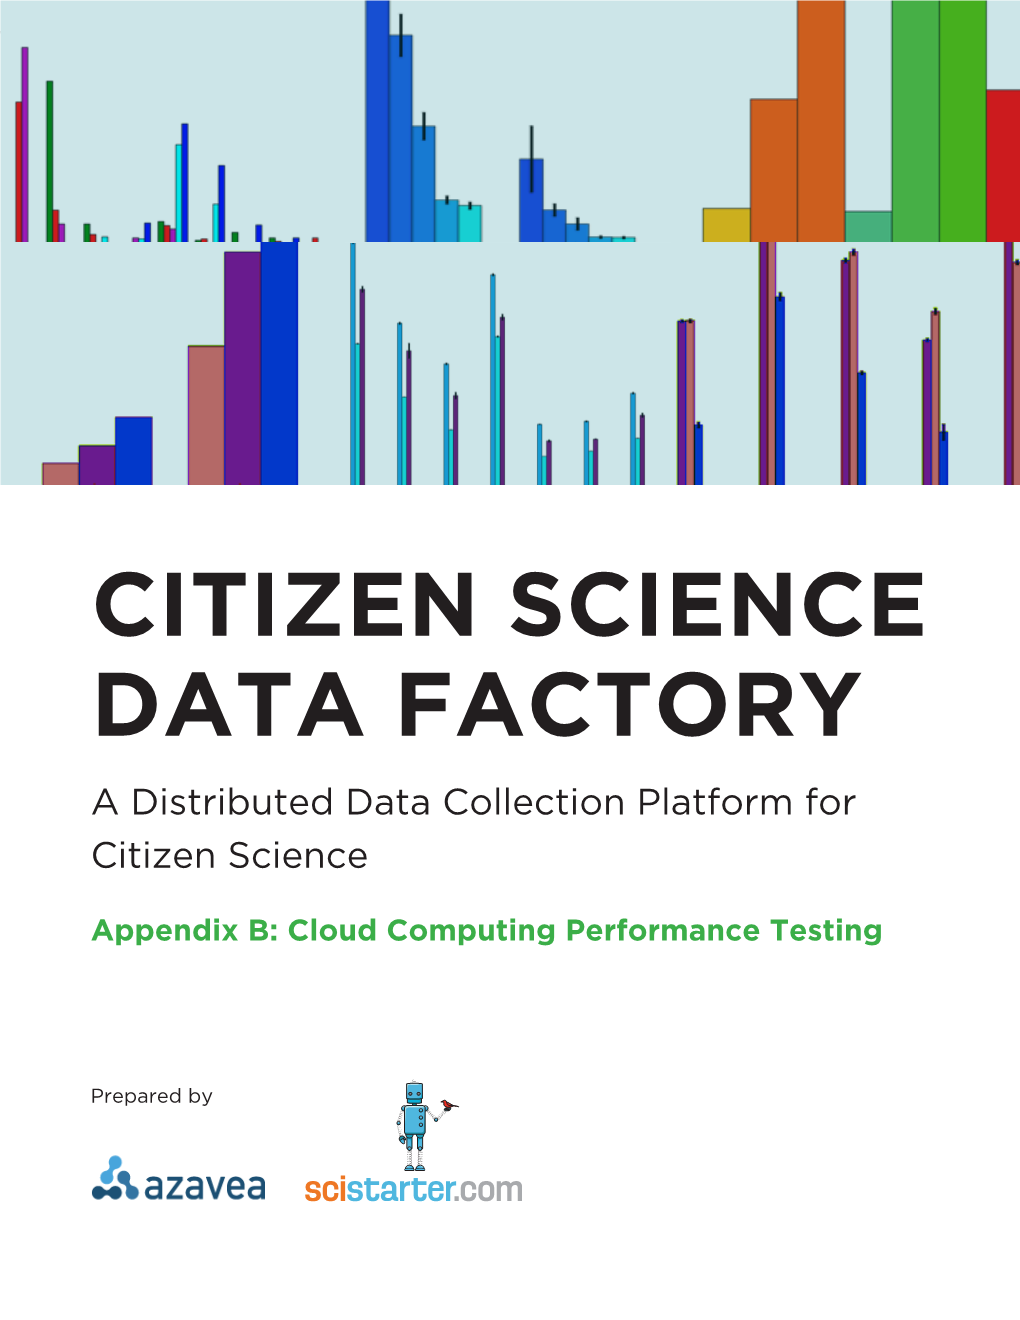 Cloud Computing and Citizen Science